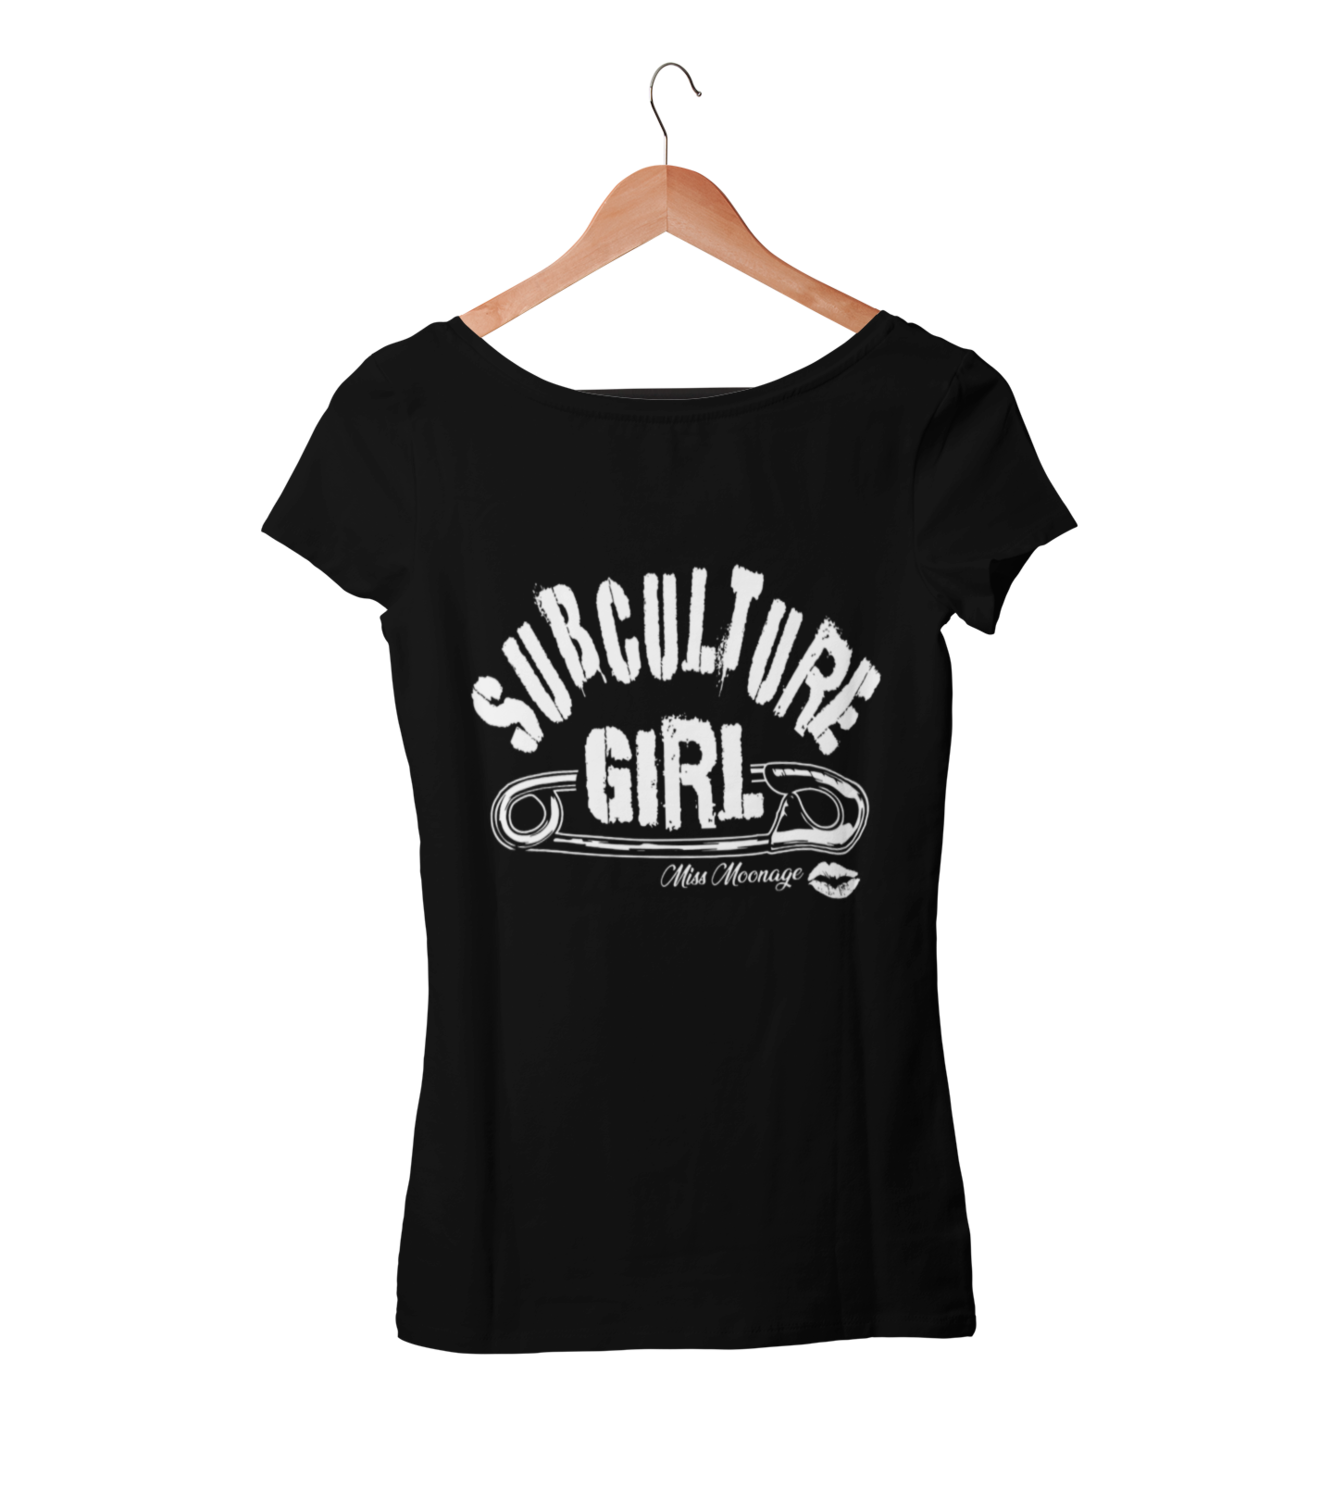 SUBCULTURE GIRL by MISS MOONAGE tshirt for WOMEN